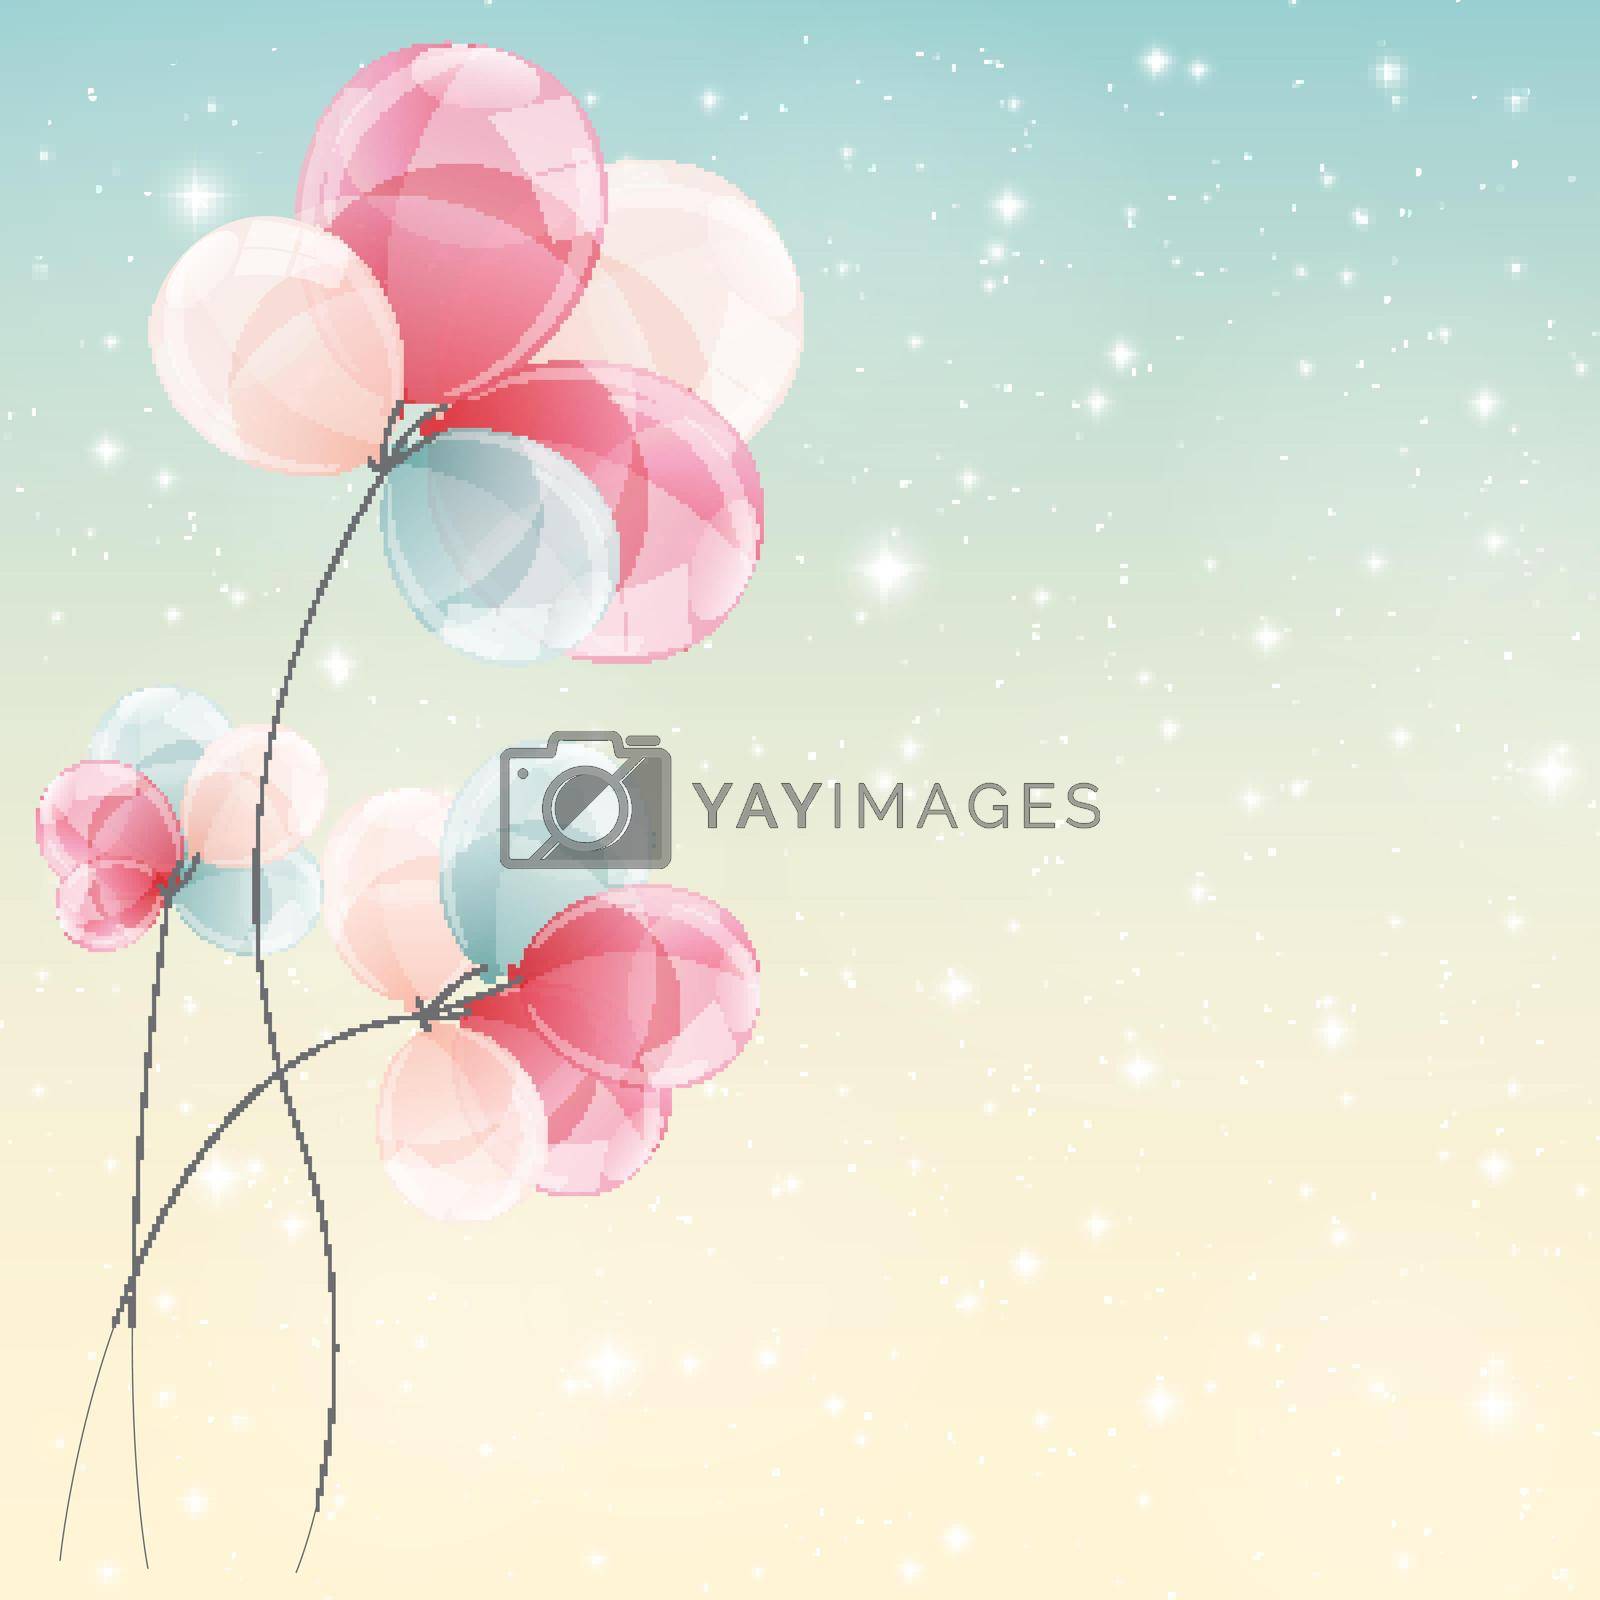 Royalty free image of Color Glossy Balloons Background Vector Illustration by yganko